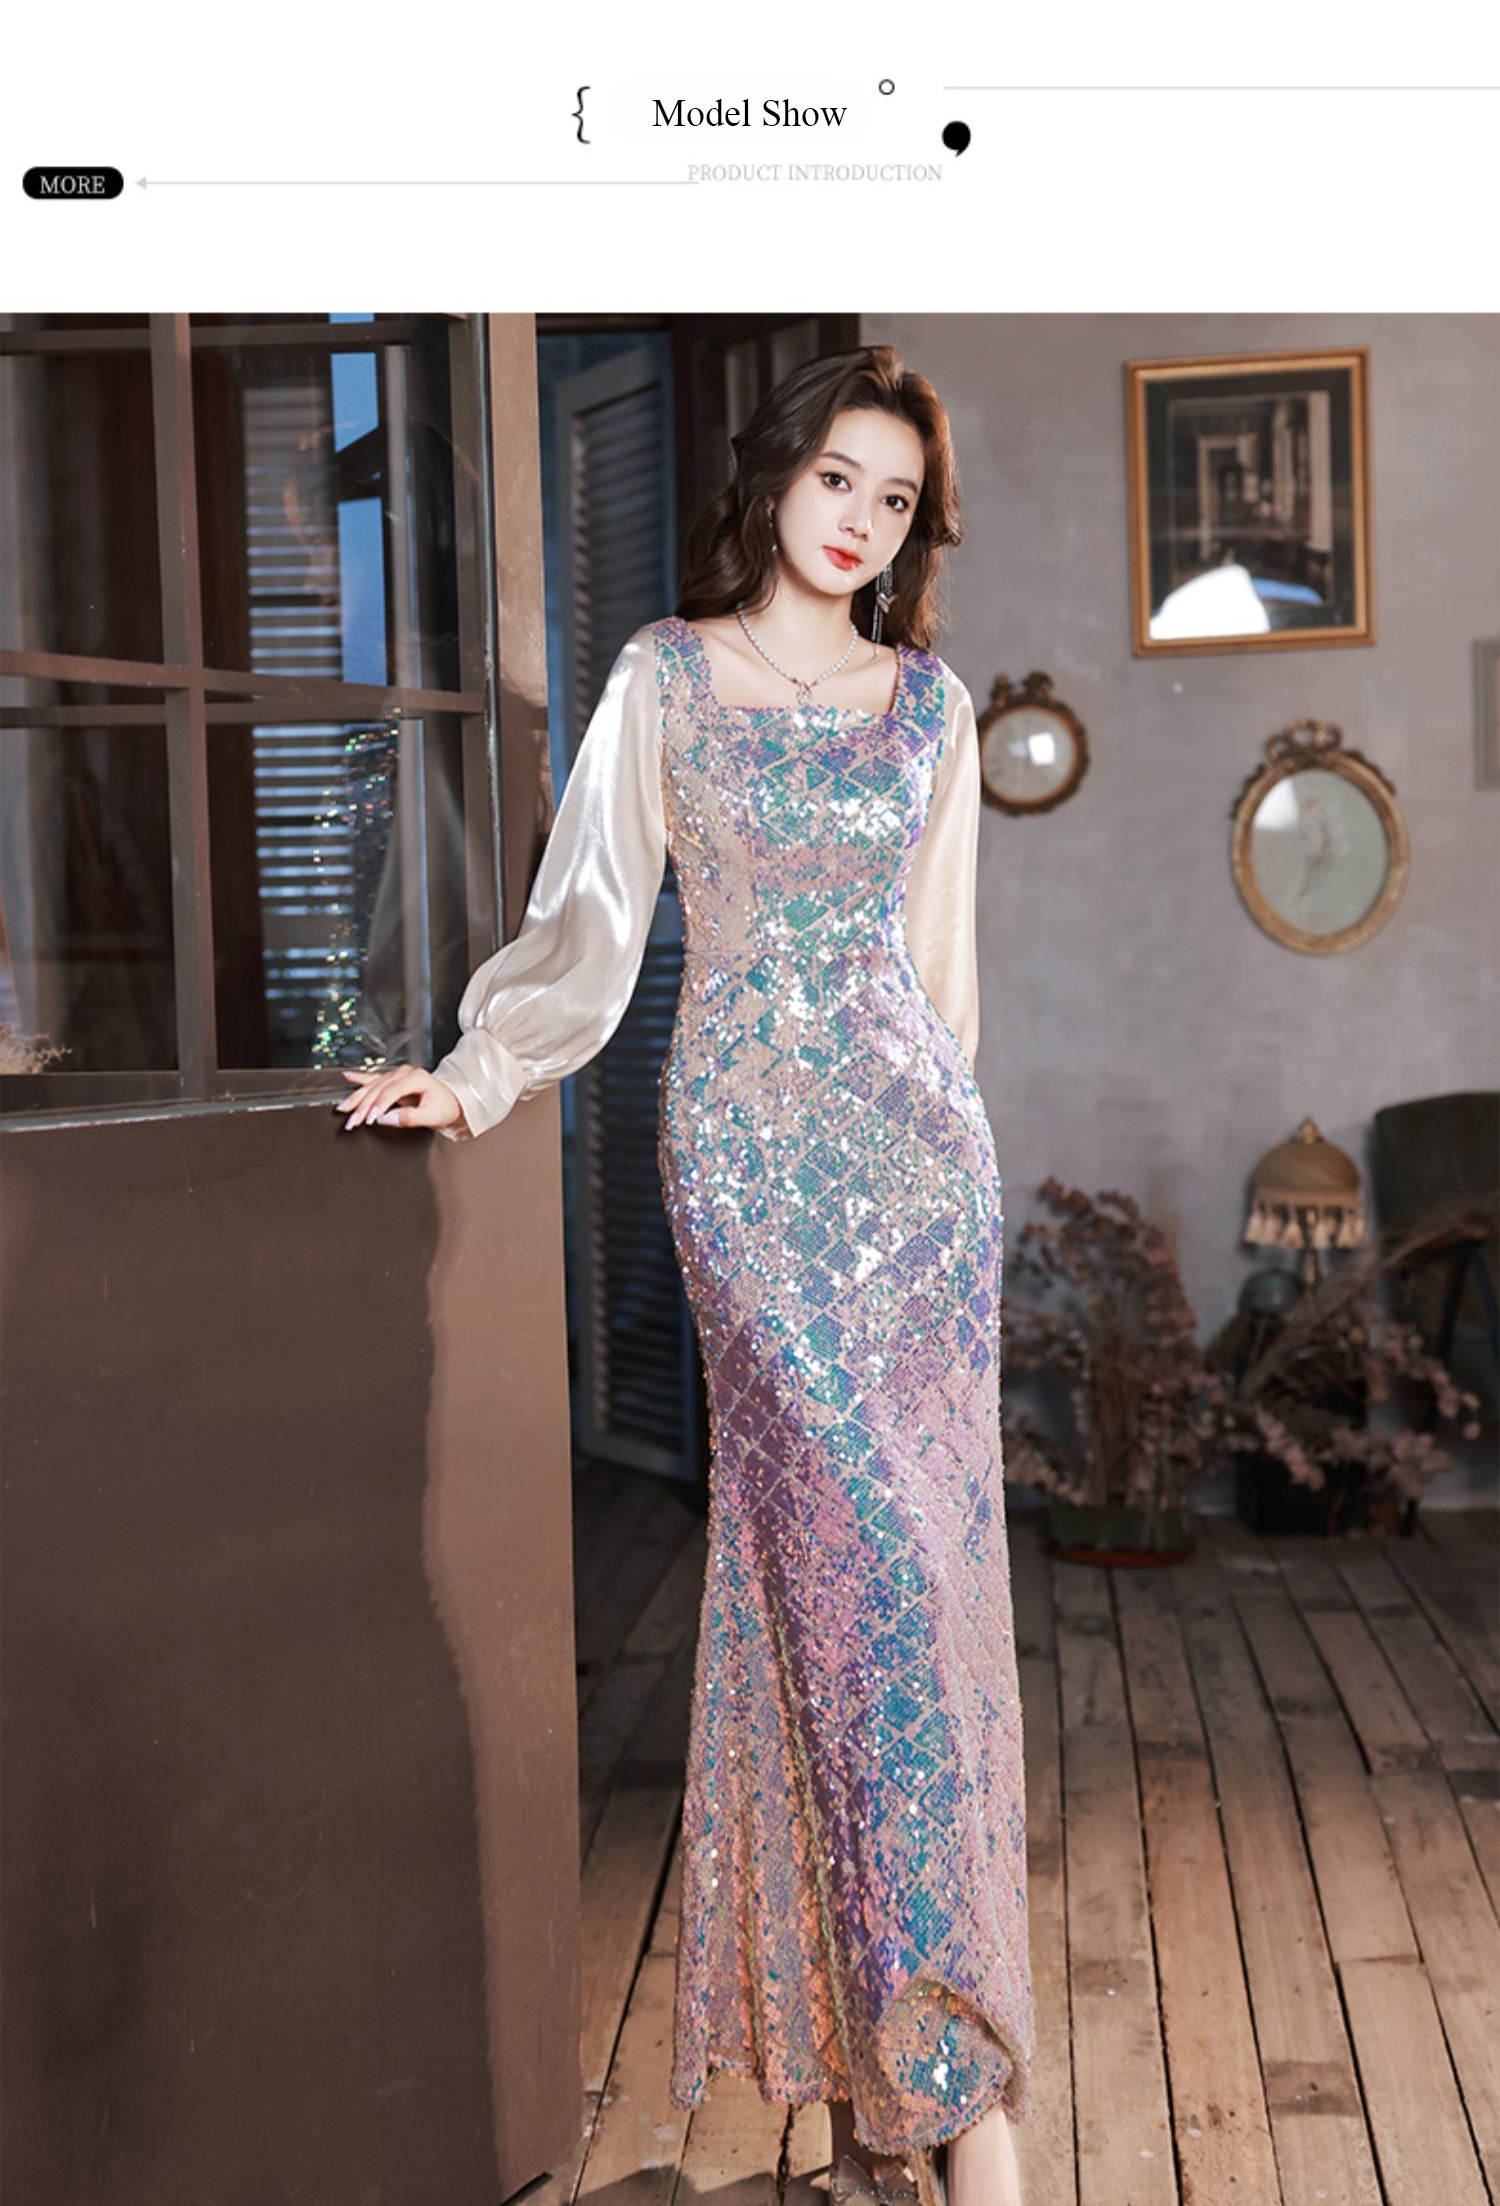 Luxury-Sparkly-Square-Neck-Long-Sleeve-Banquet-Party-Fishtail-Dress12